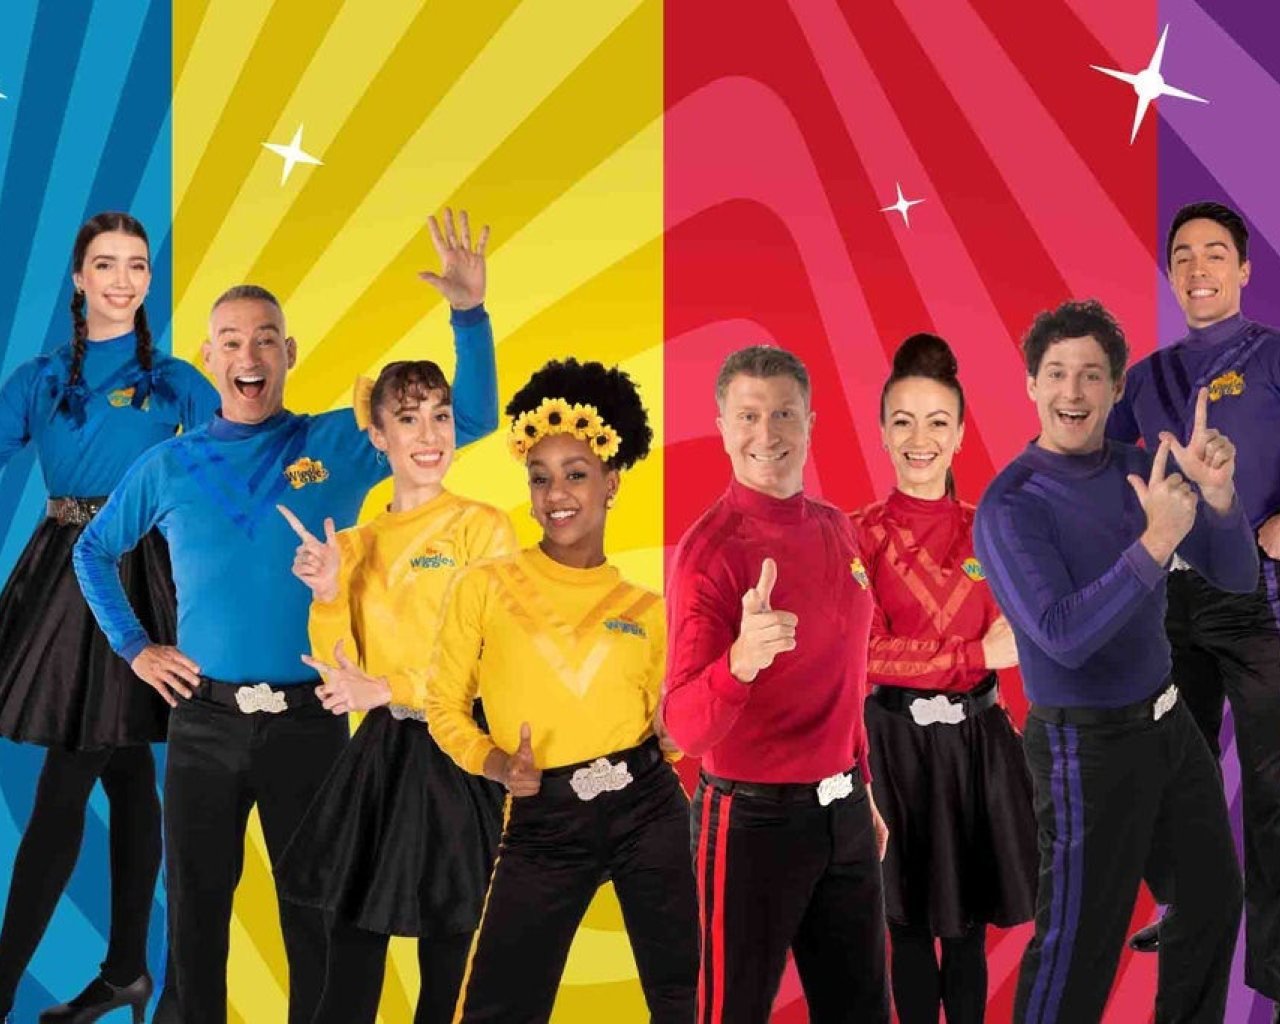 The Wiggles WIGGLY BIG DAY OUT! Tour